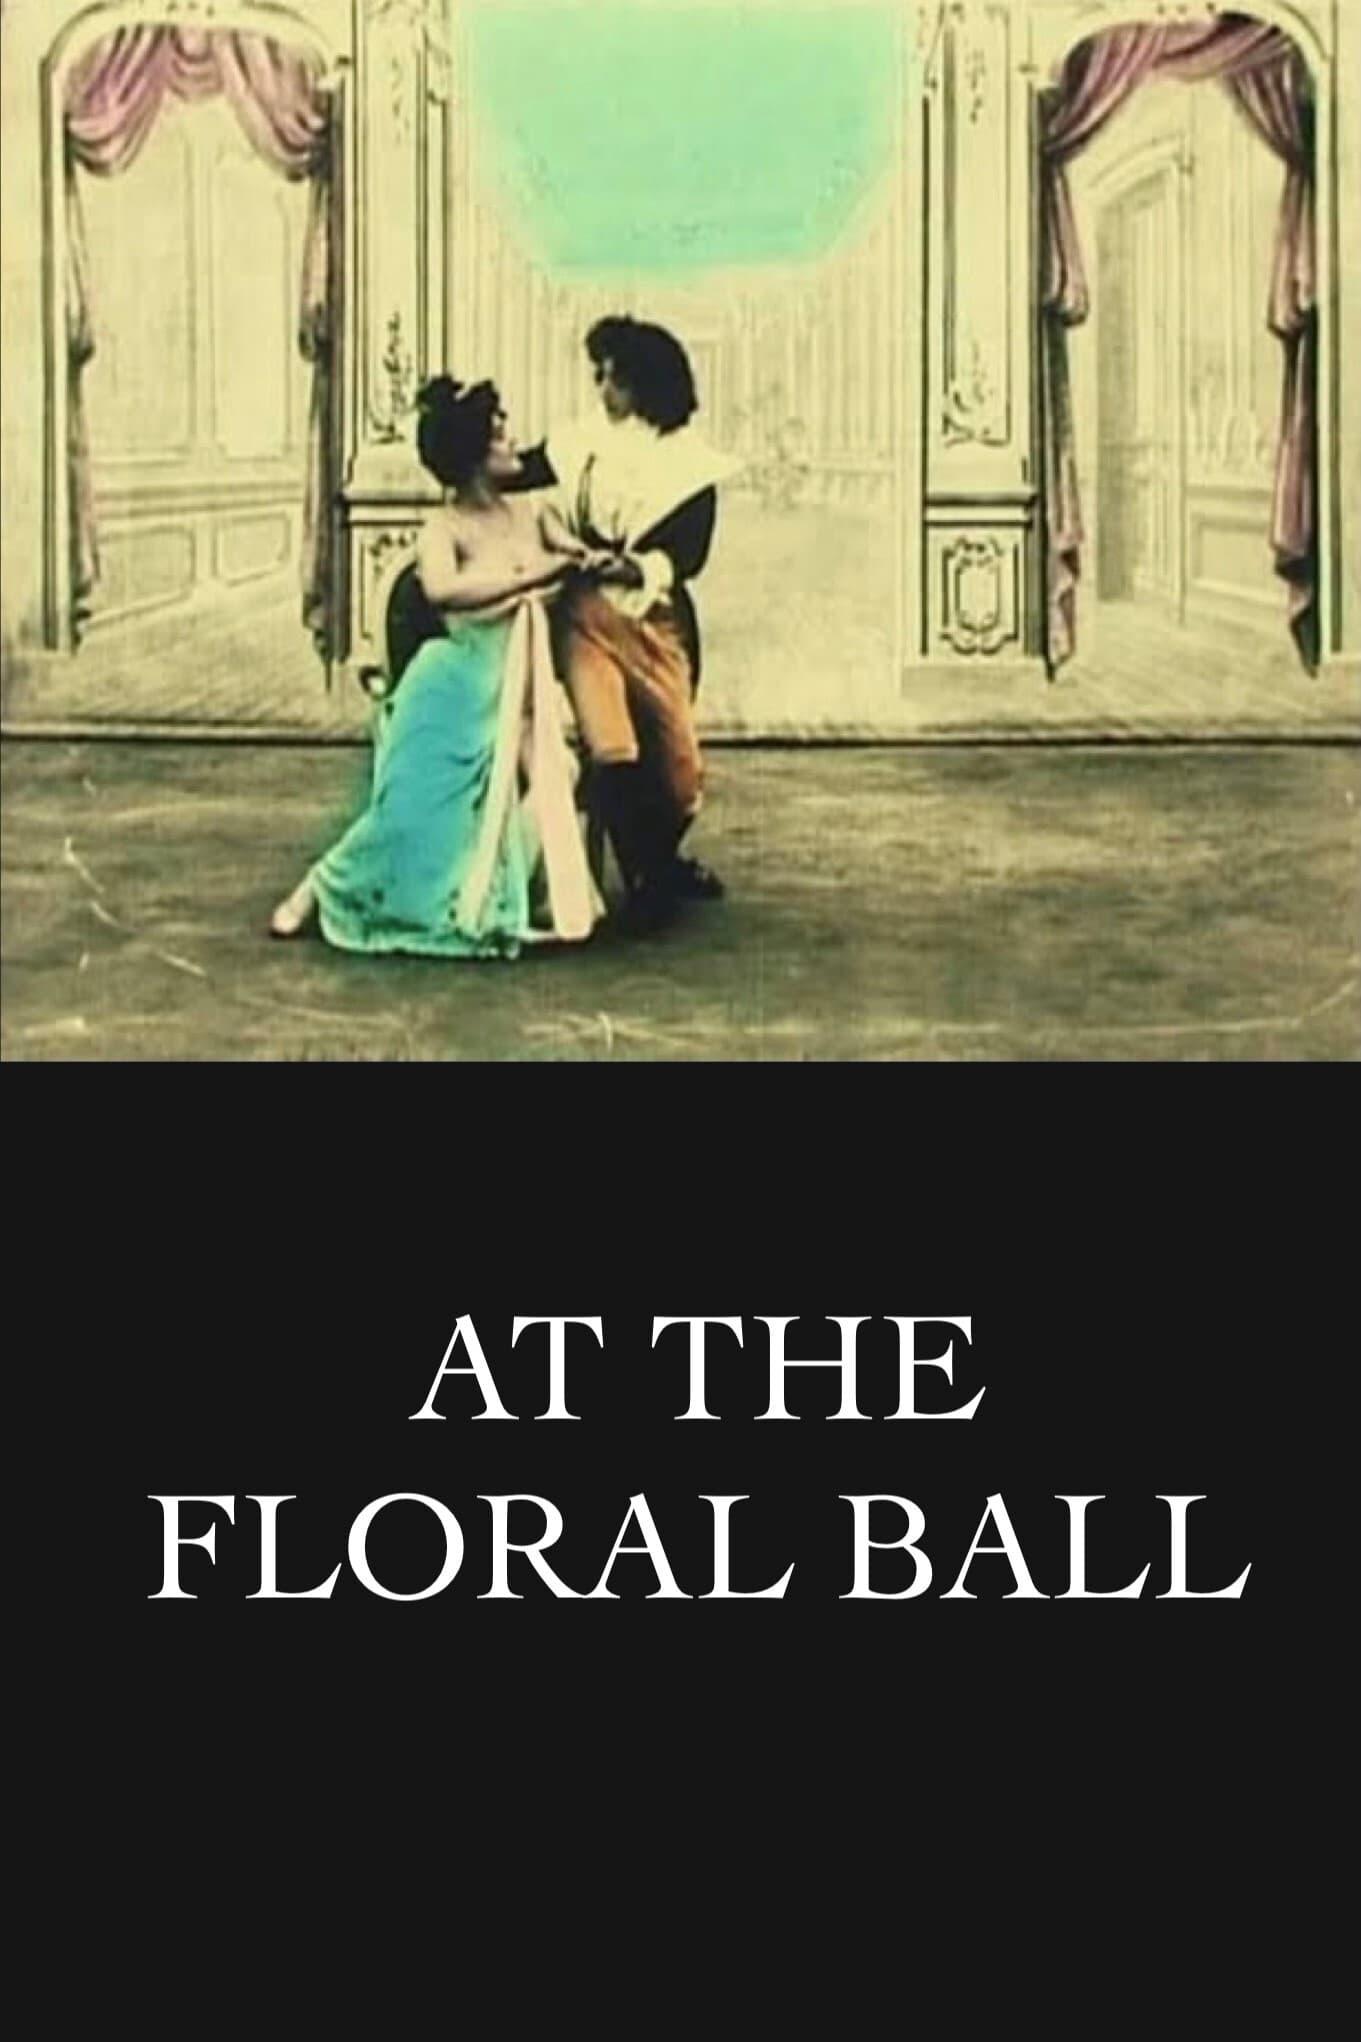 At the Floral Ball poster